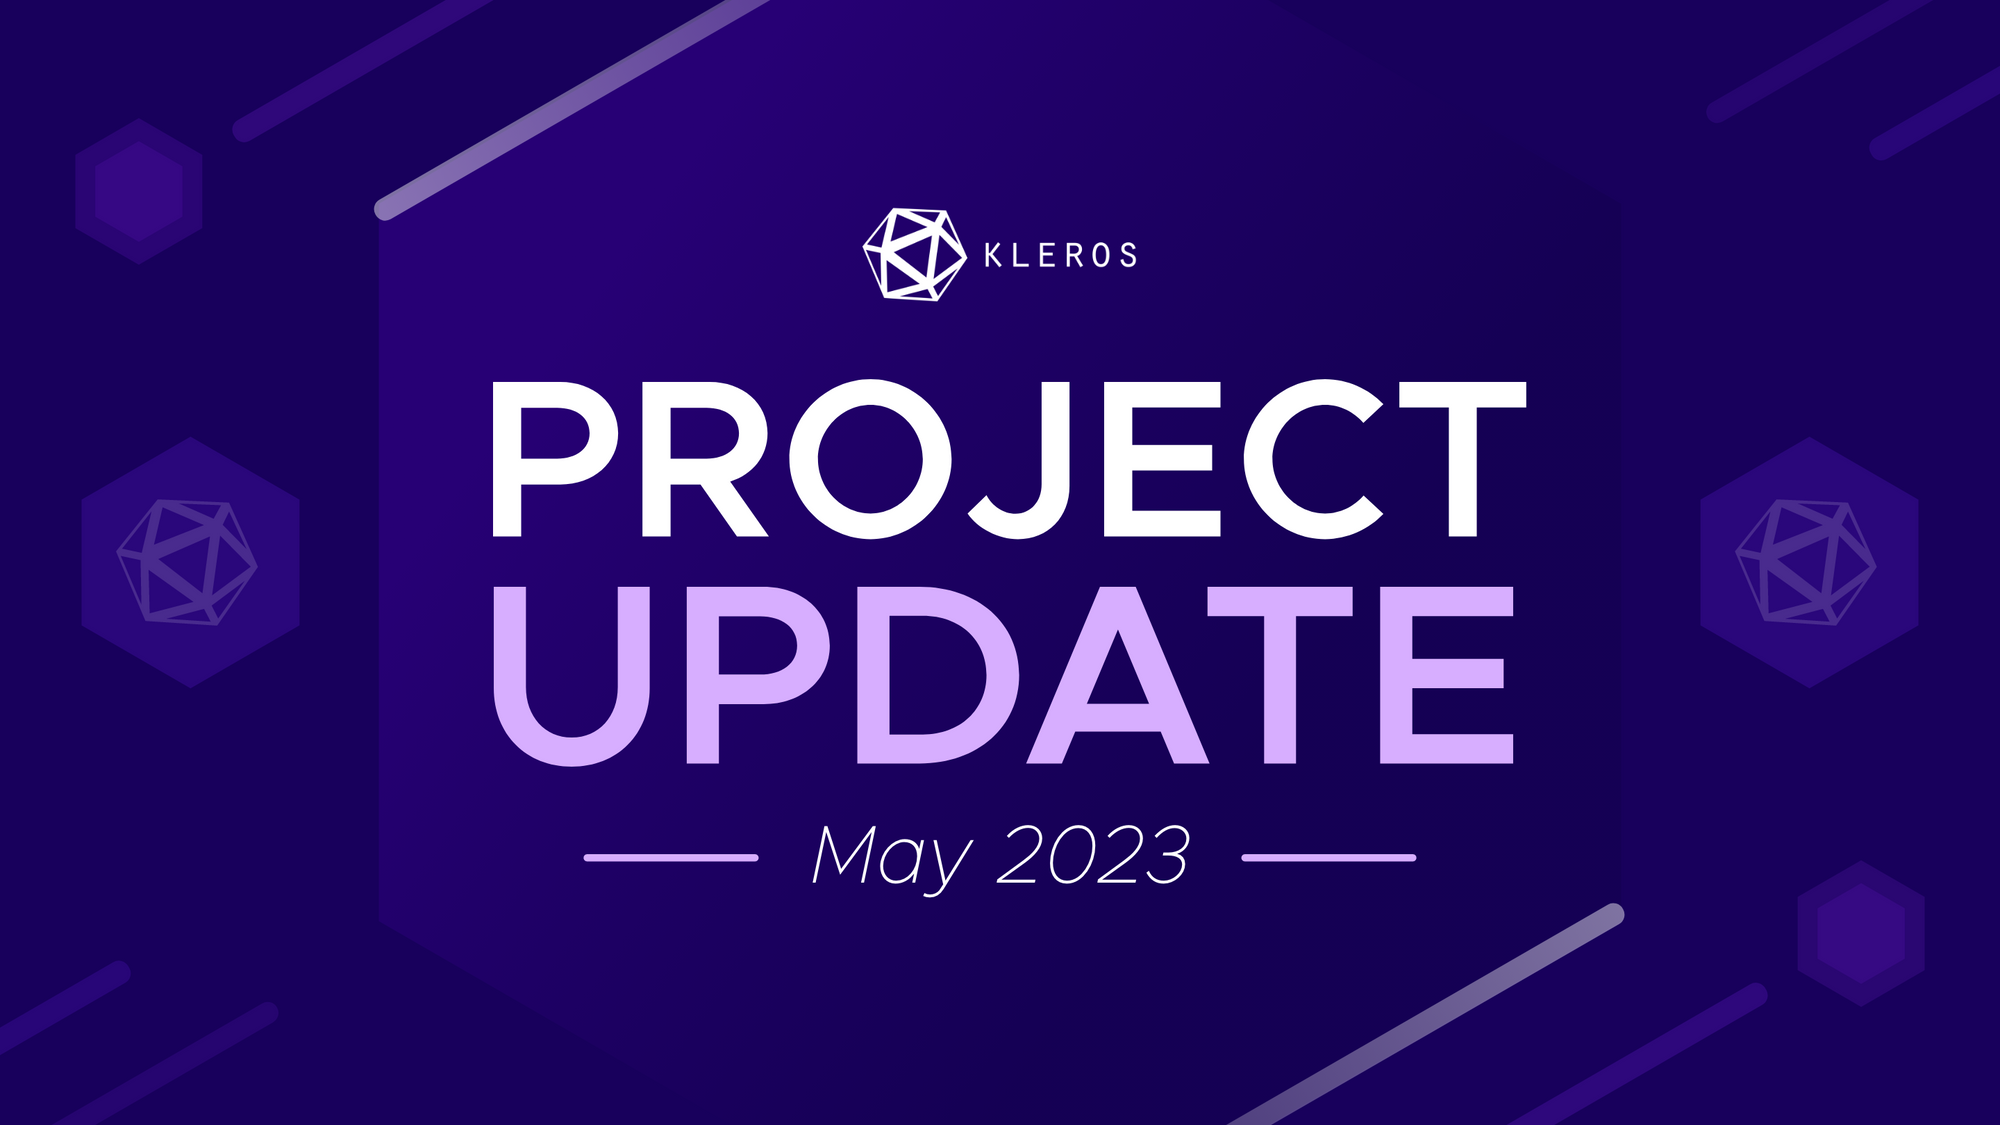 Kleros Project Update - May 2023